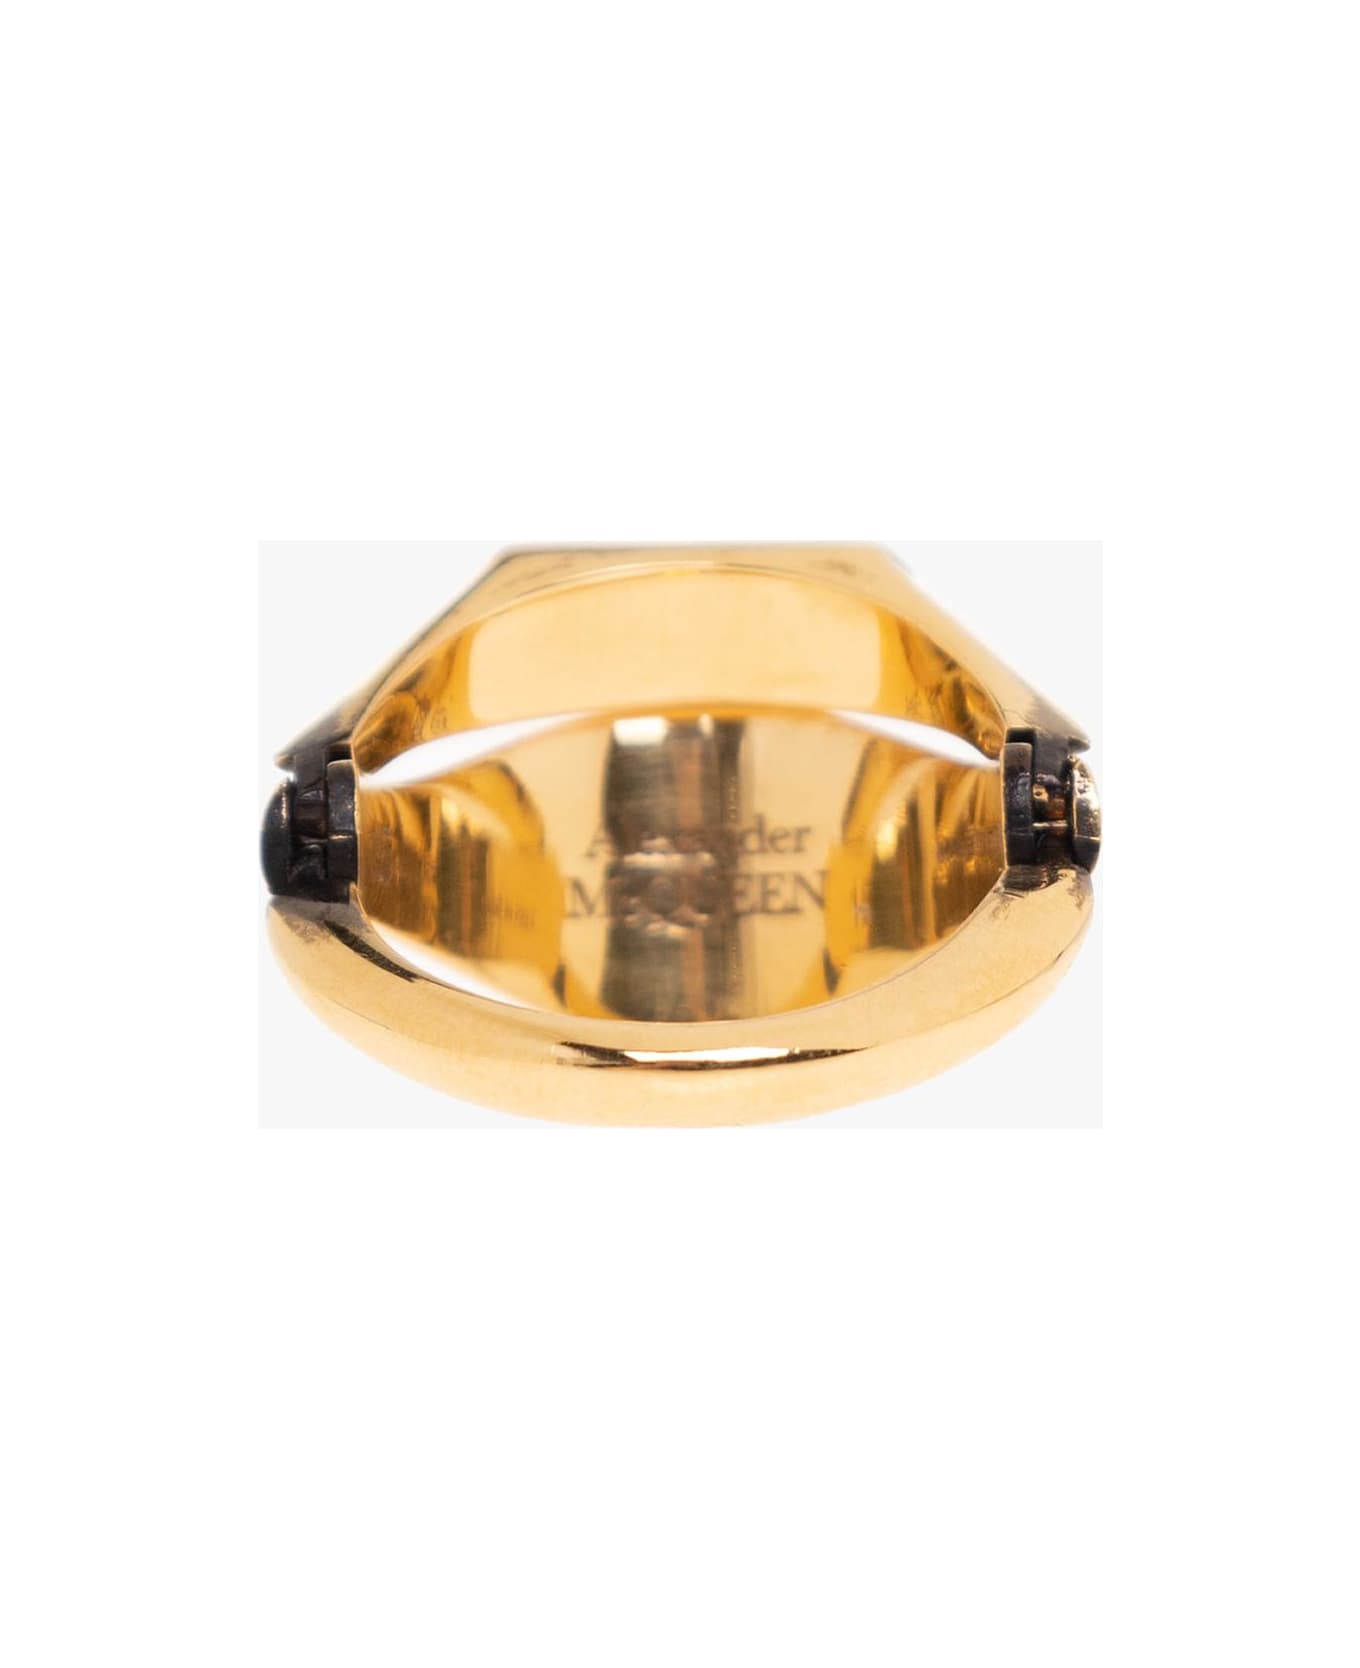 Alexander McQueen Ring With Logo - GOLD リング